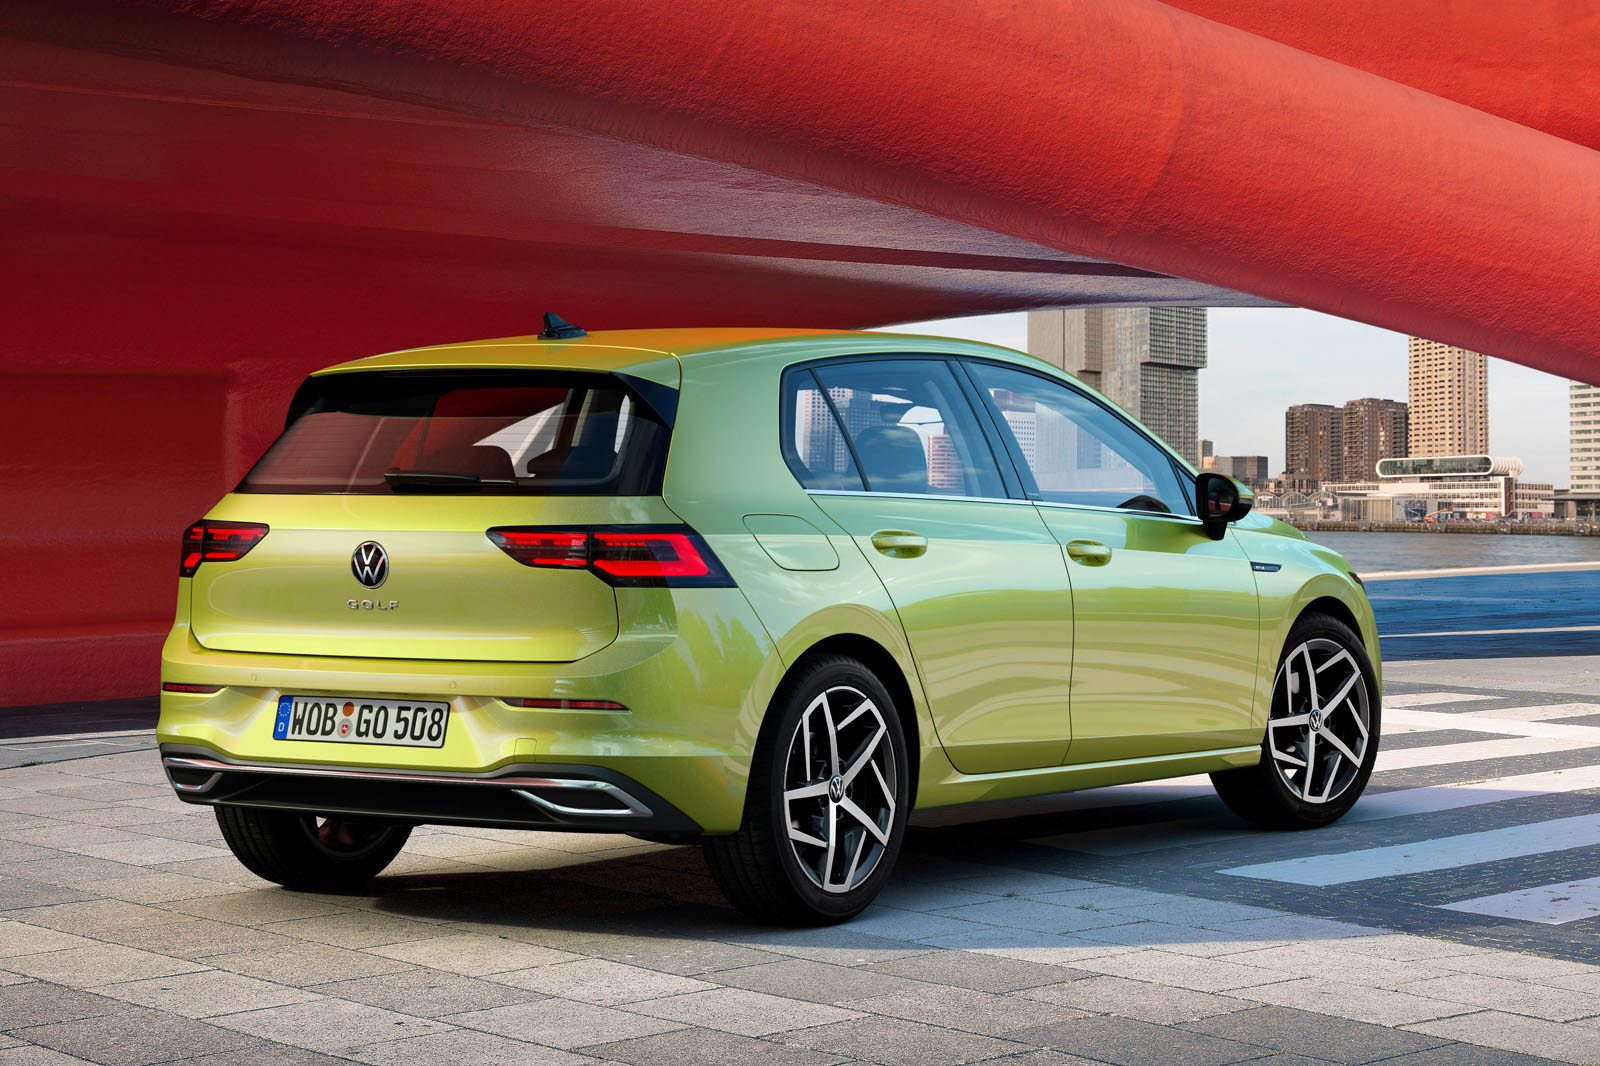 New 2020 Volkswagen Golf: first prices and specs announced